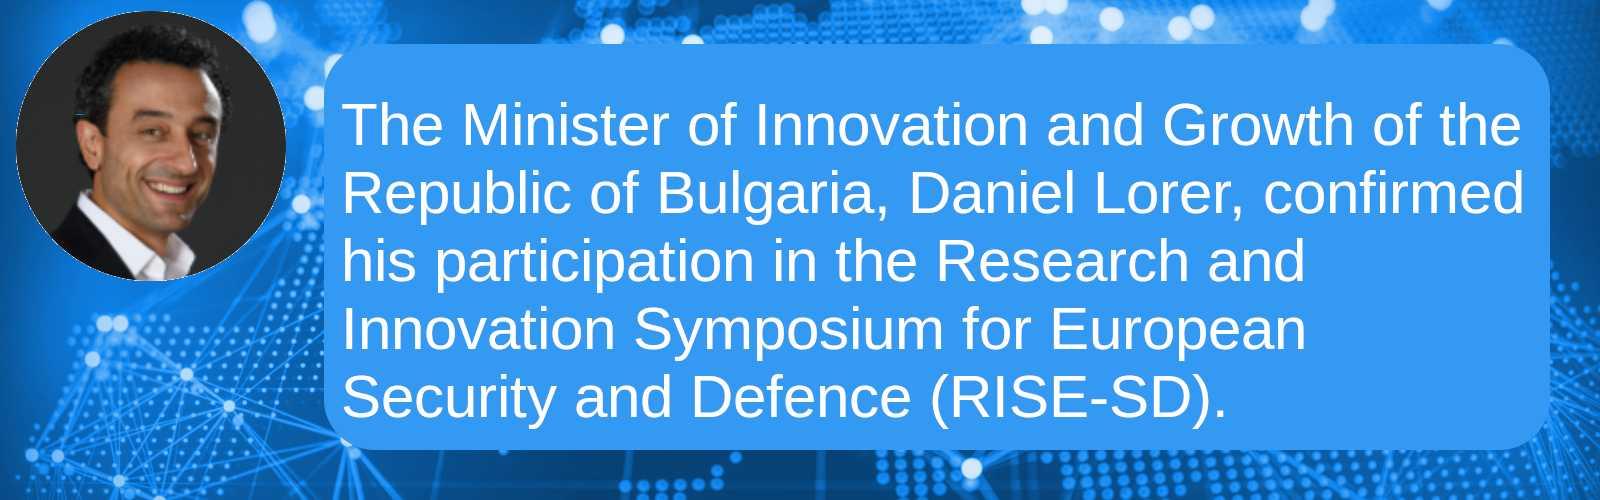 The Minister of Innovation and Growth of the Republic of Bulgaria, Daniel Lorer, confirmed his participation in the Research and Innovation Symposium for European Security and Defence (RISW-SD).